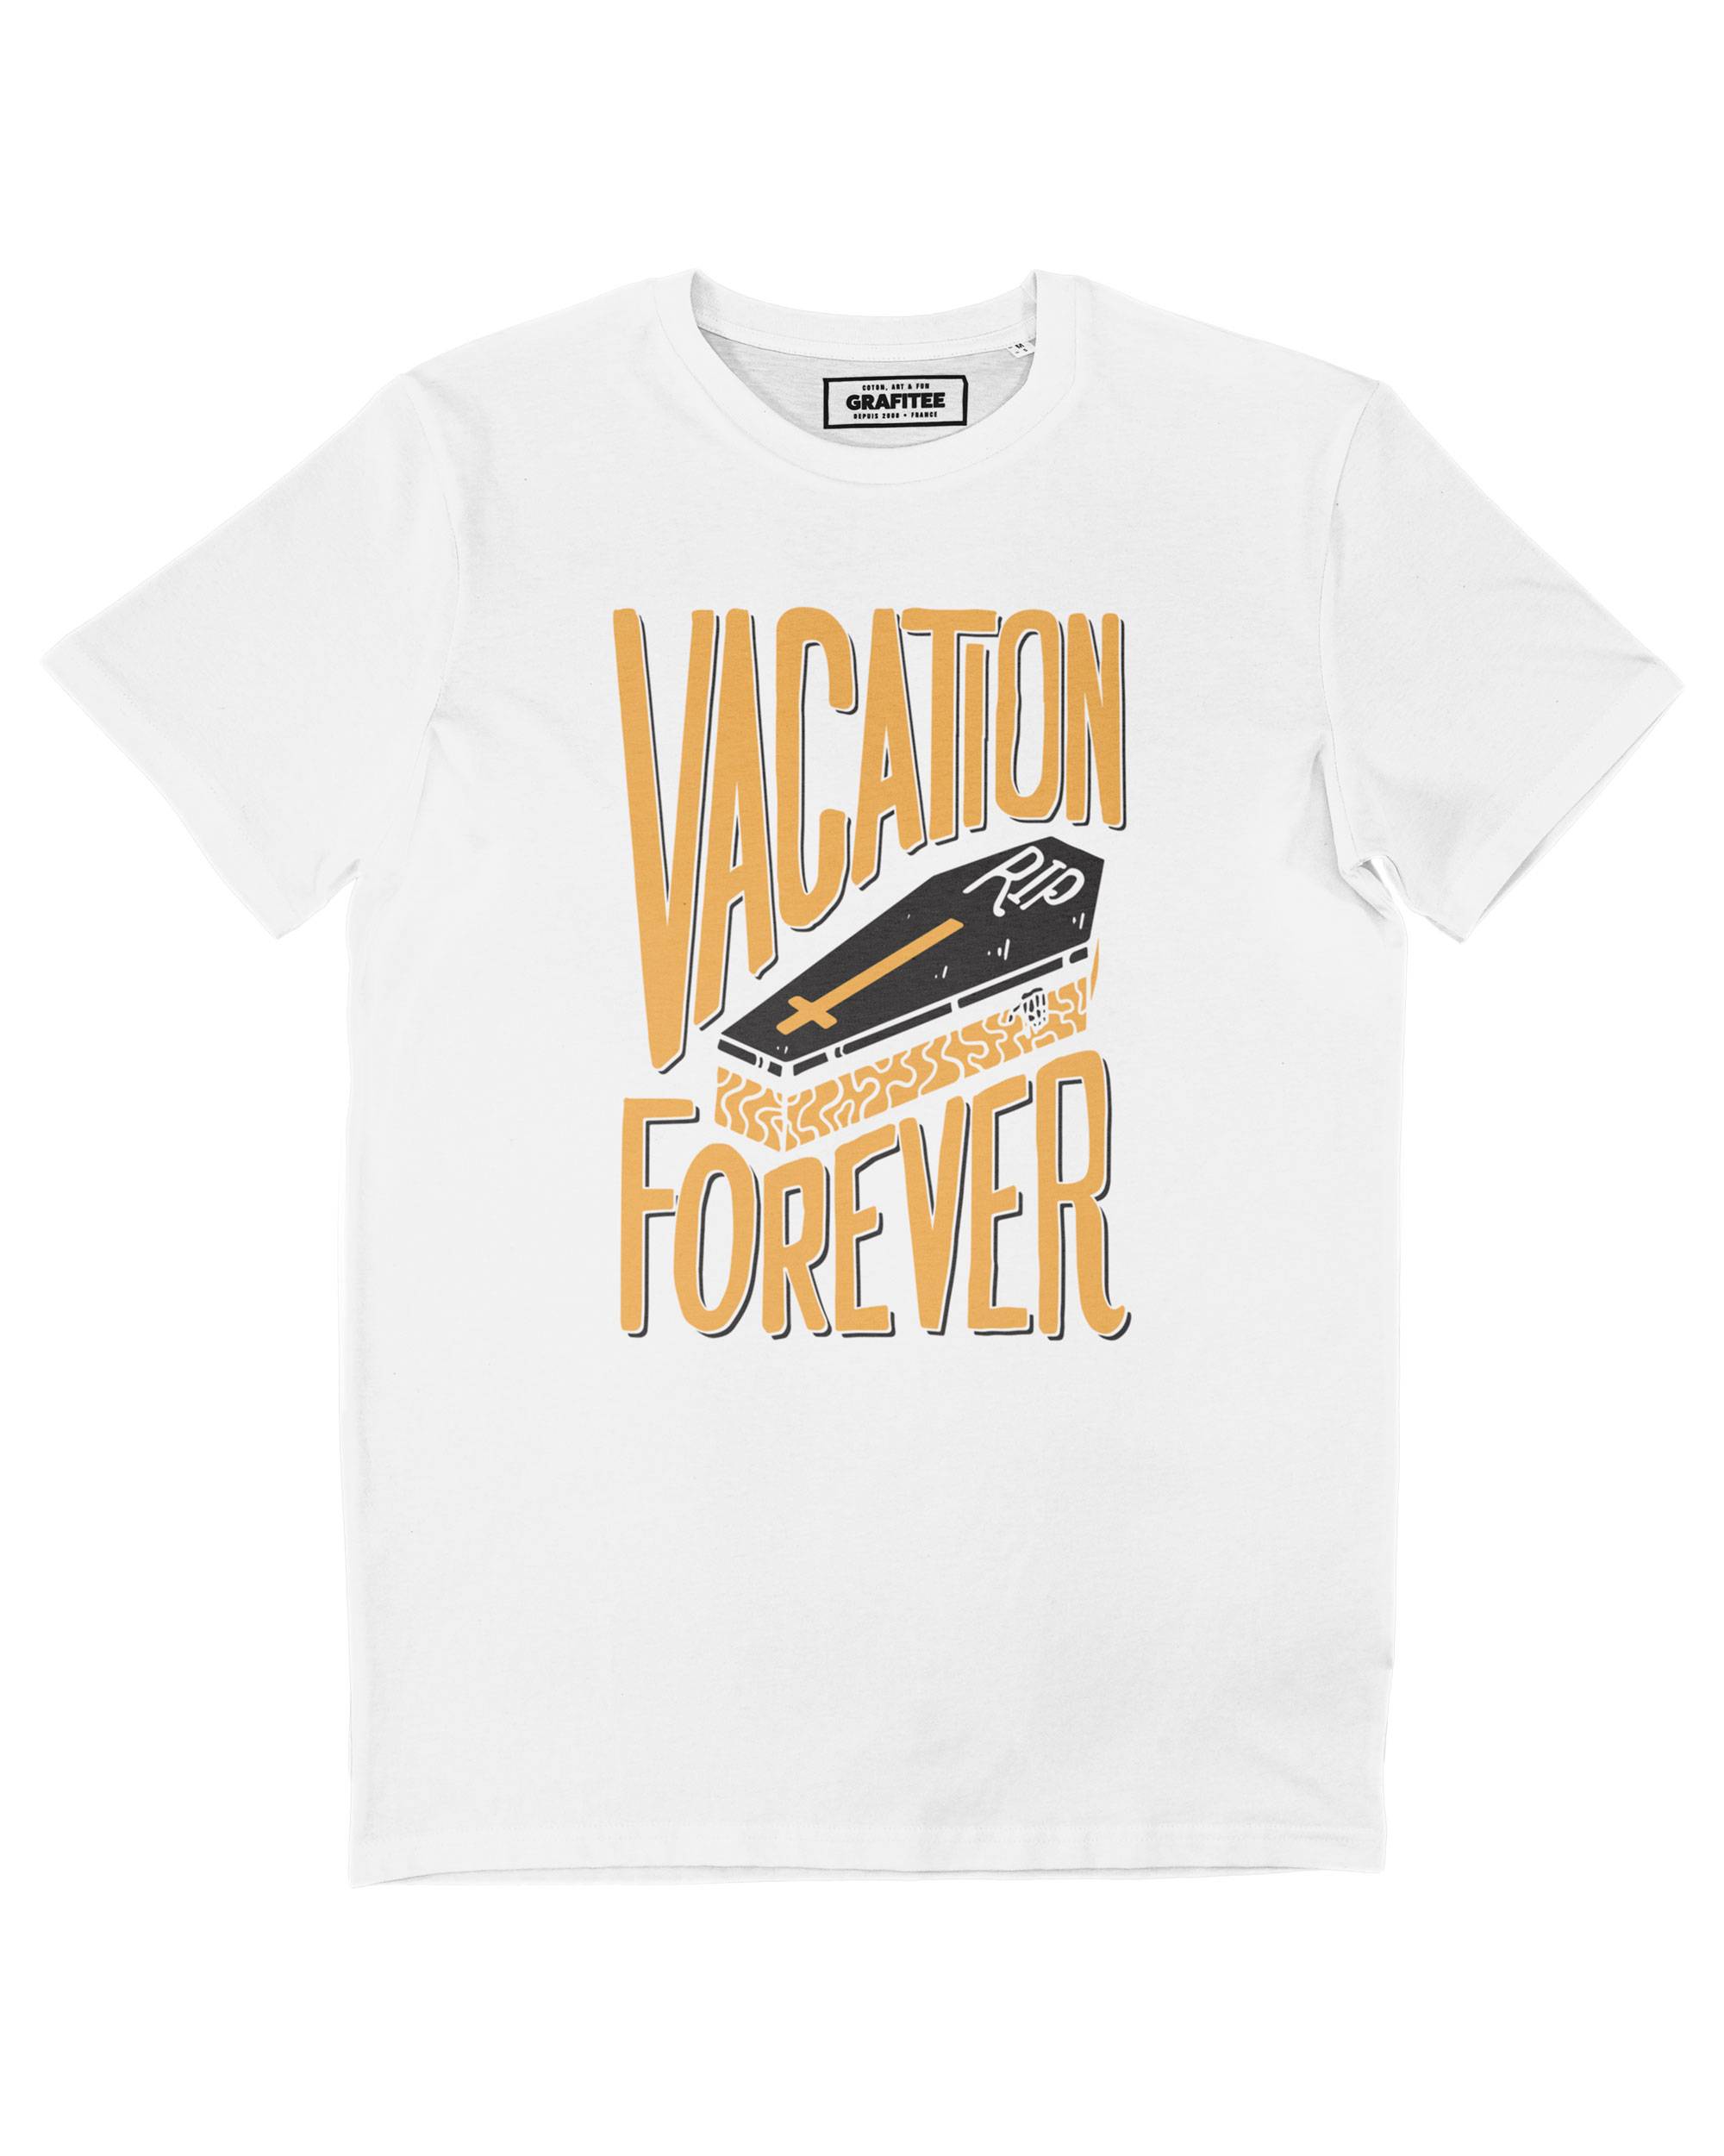 T-shirt Vacation Forever Grafitee